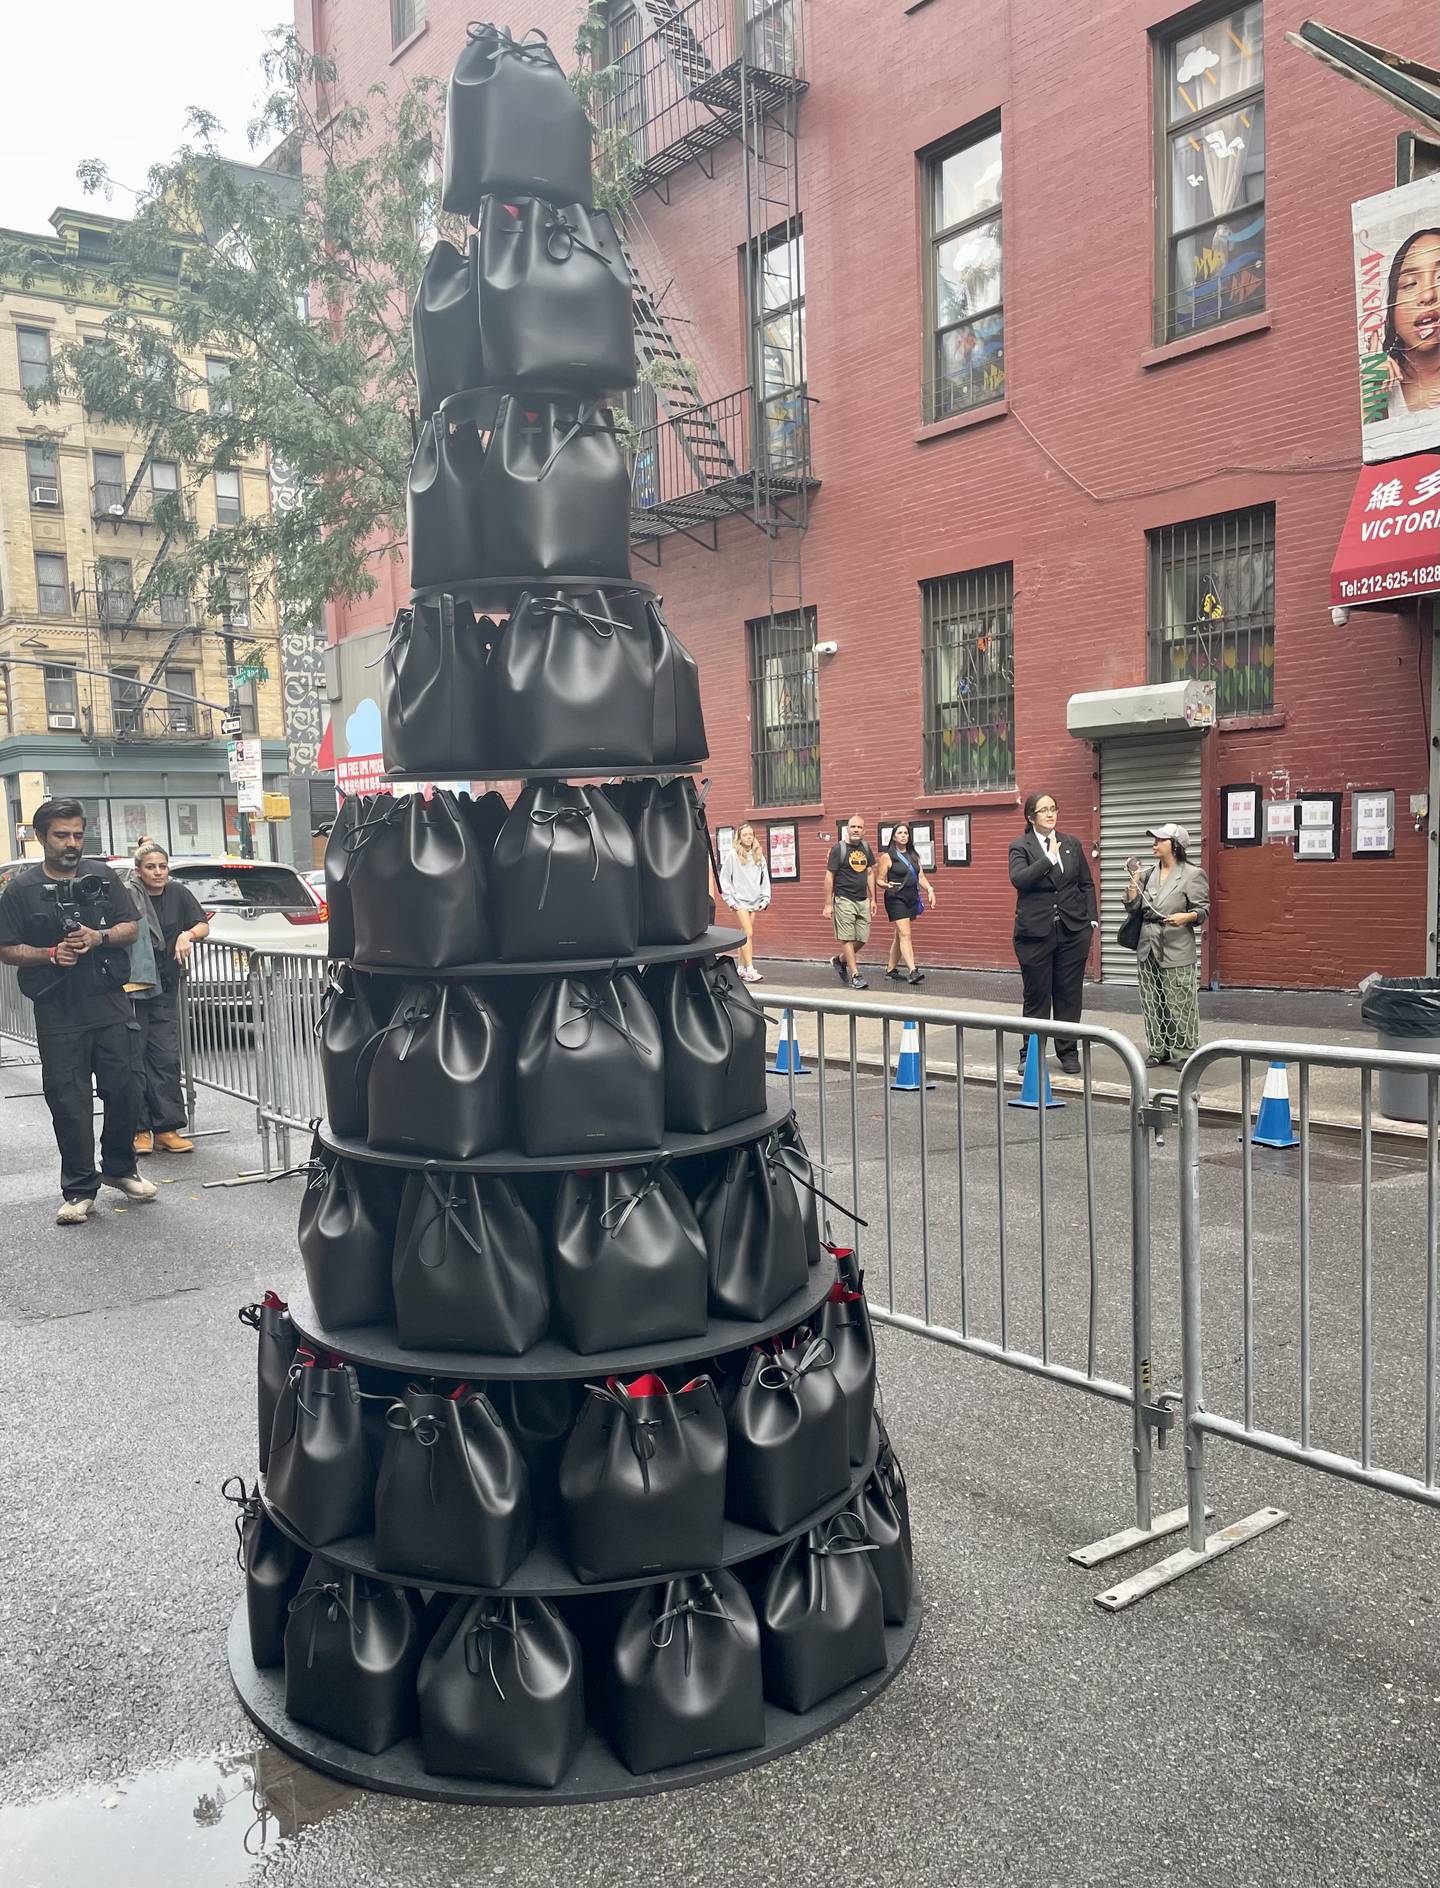 A tower made of Mansur Gavriel's signature black bucket bags.